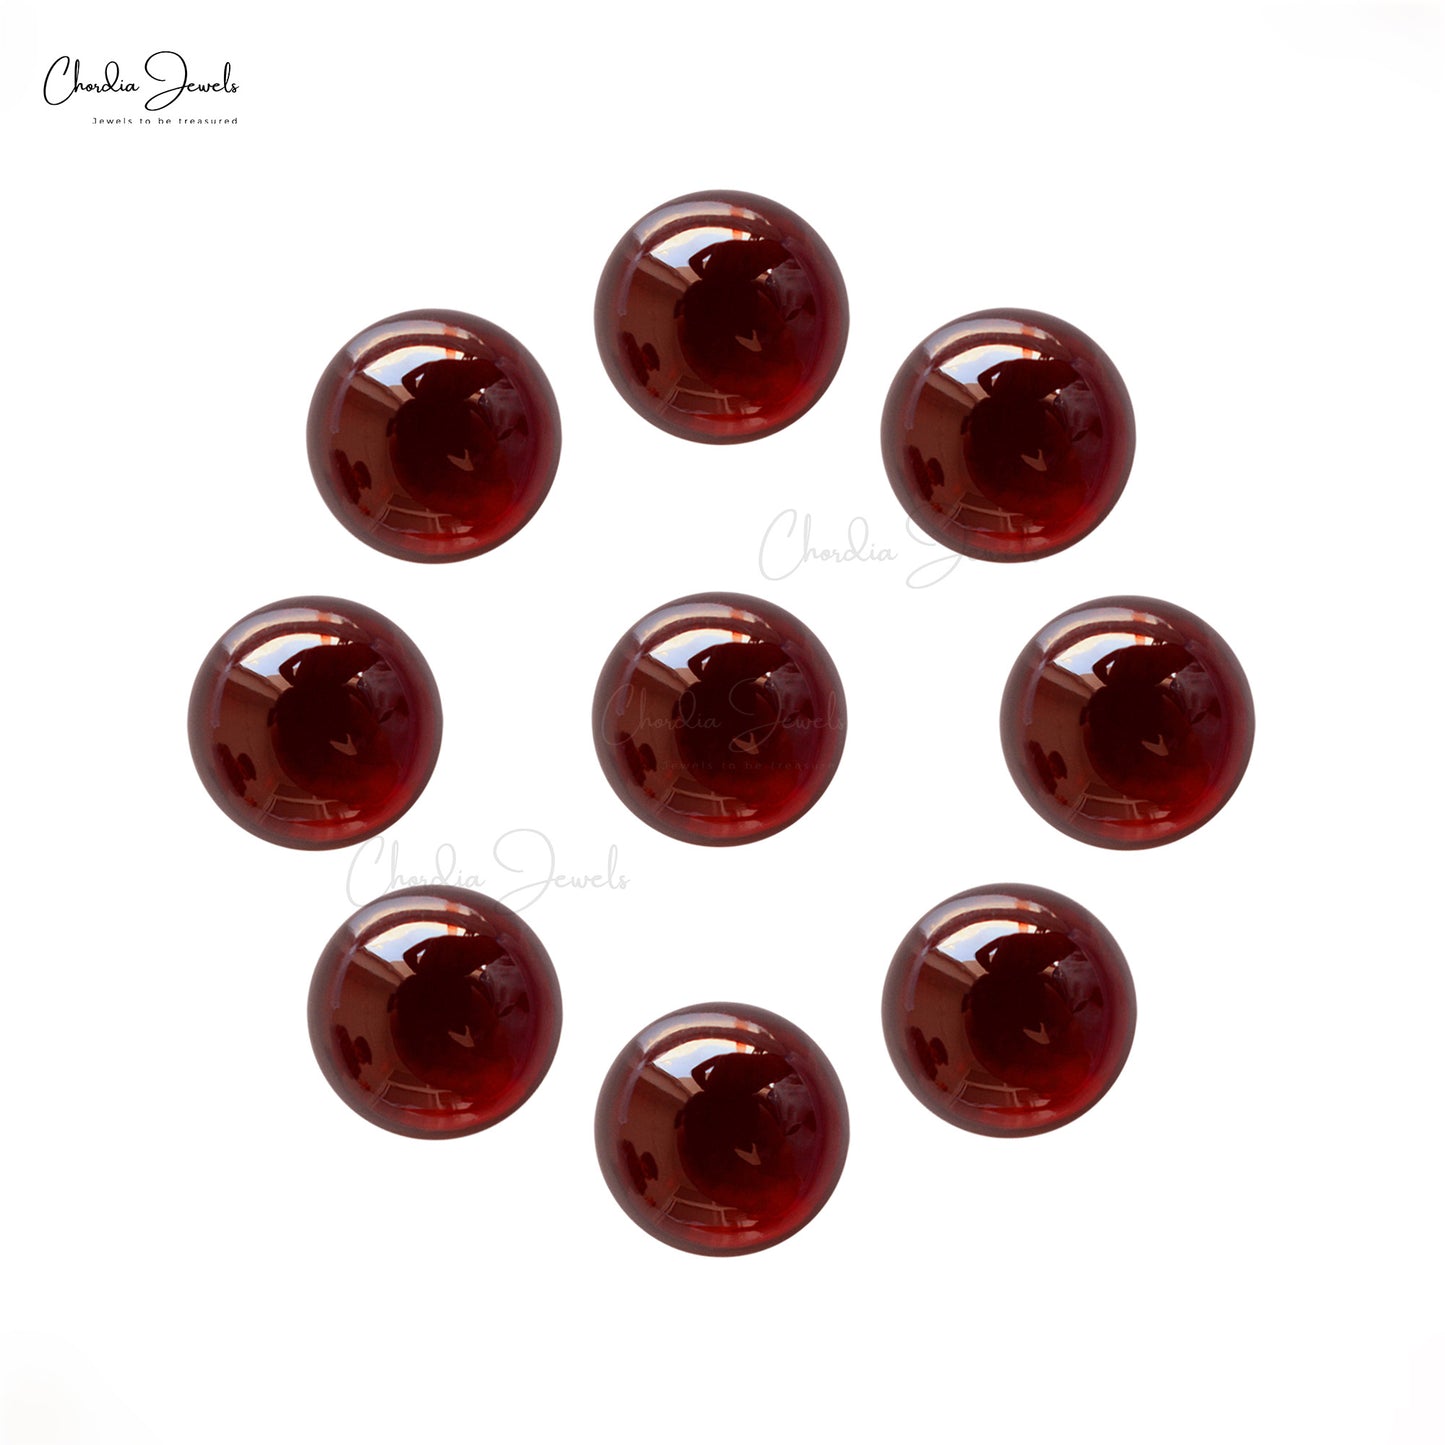 Load image into Gallery viewer, Garnet Round Cabochon Fine Quality 2 MM-2.50 MM Red Color Loose Gemstone for Rings, 1 Piece
